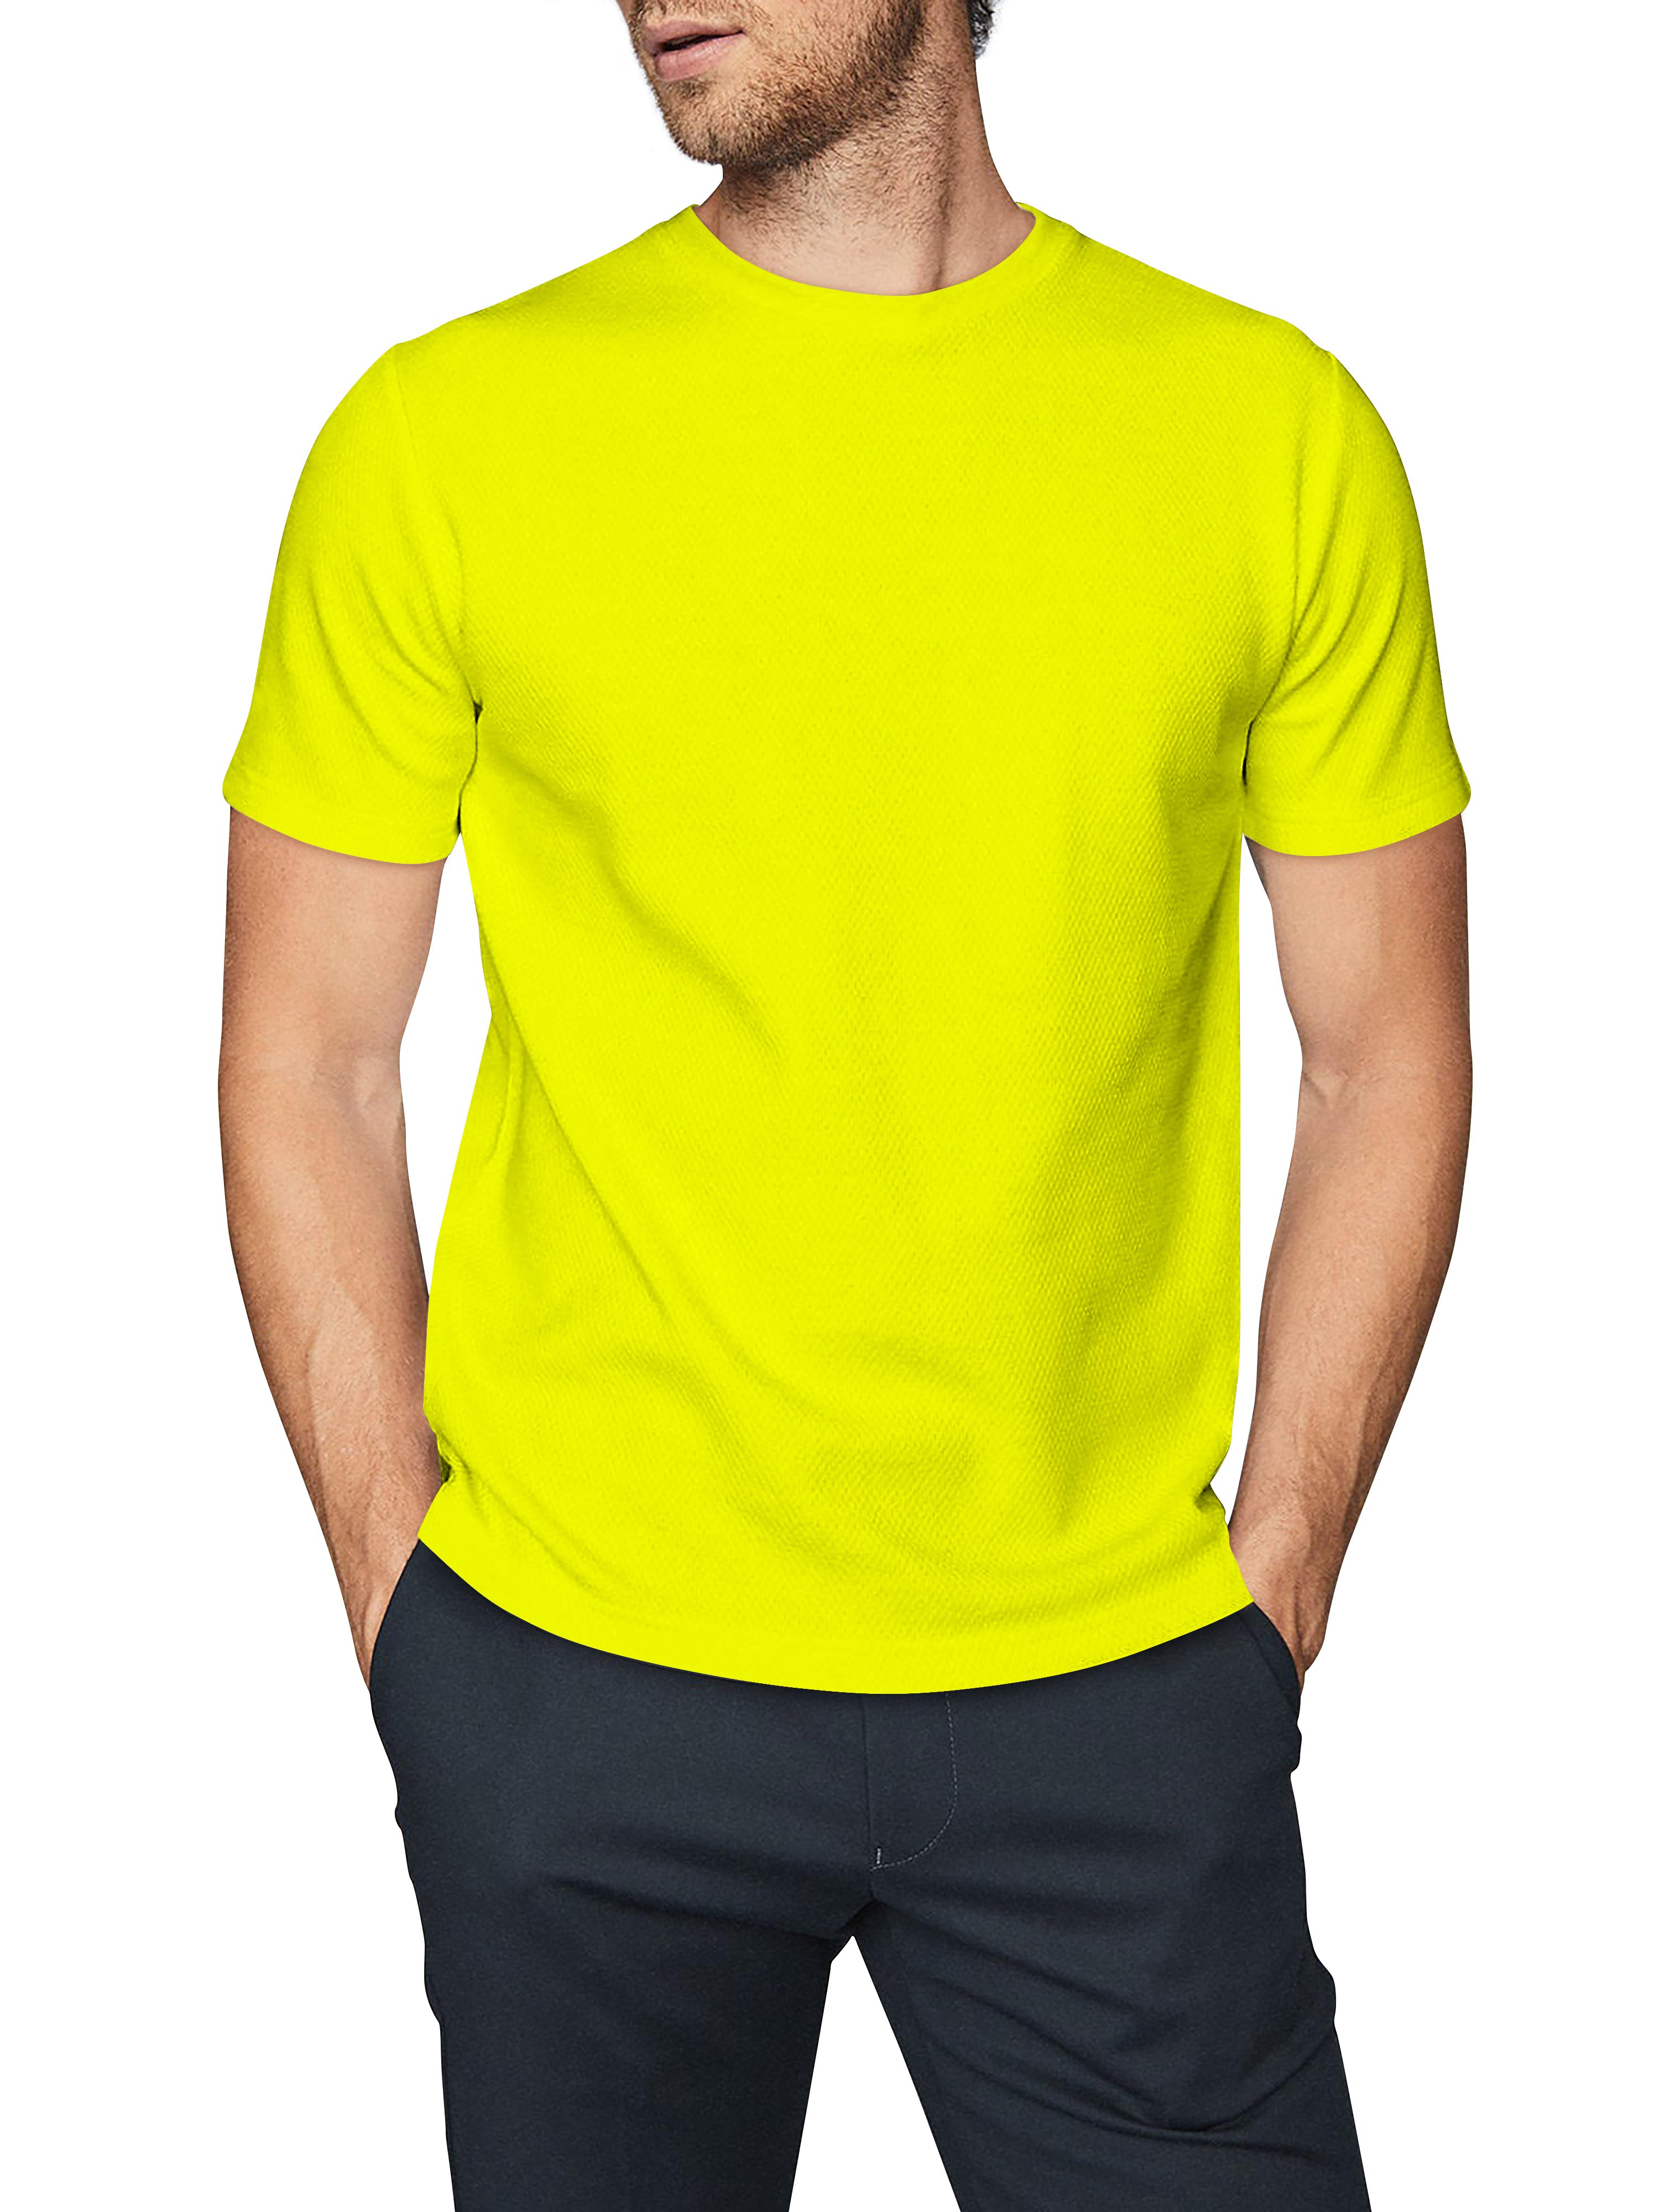 Selected Color is 1ks18_Neon Lime